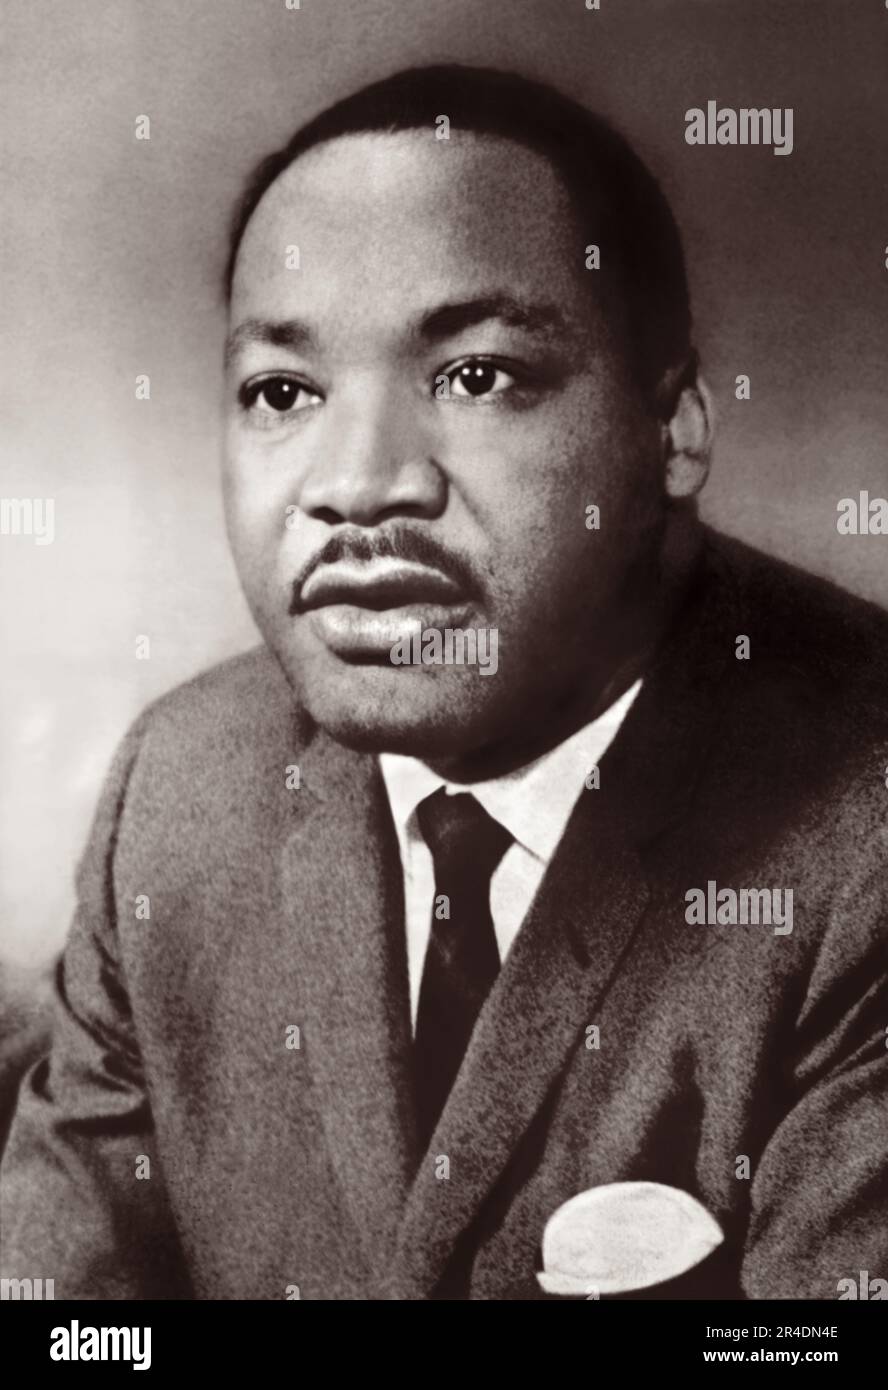 Portrait of civil rights leader Dr. Martin Luther King, Jr. Stock Photo